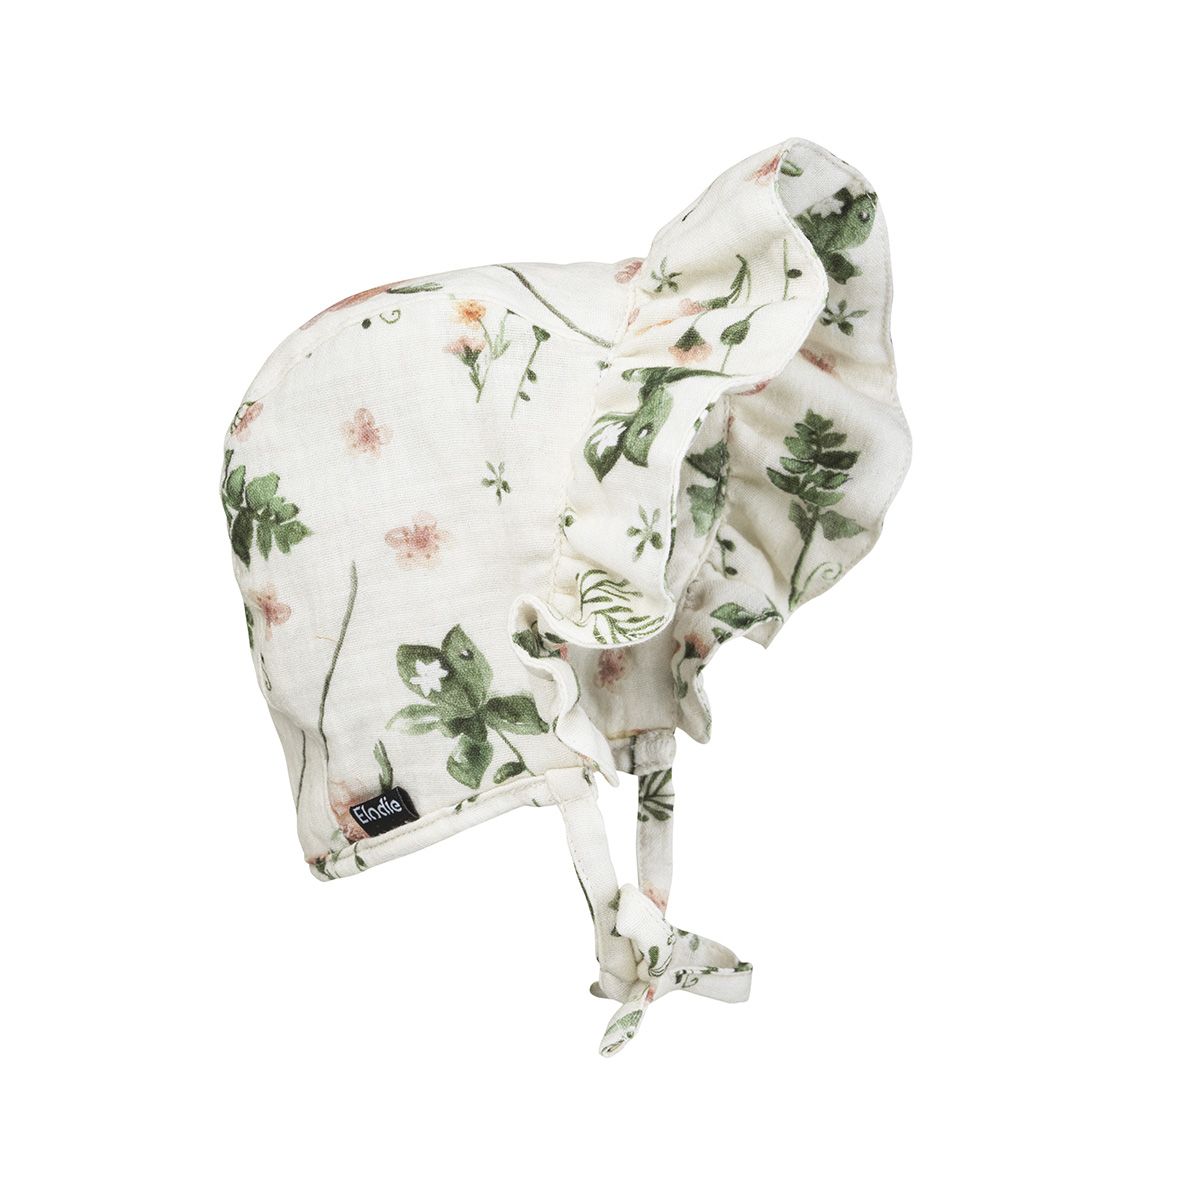 50585107588d-baby-bonnet-meadow-blossom-1-ss22-pp